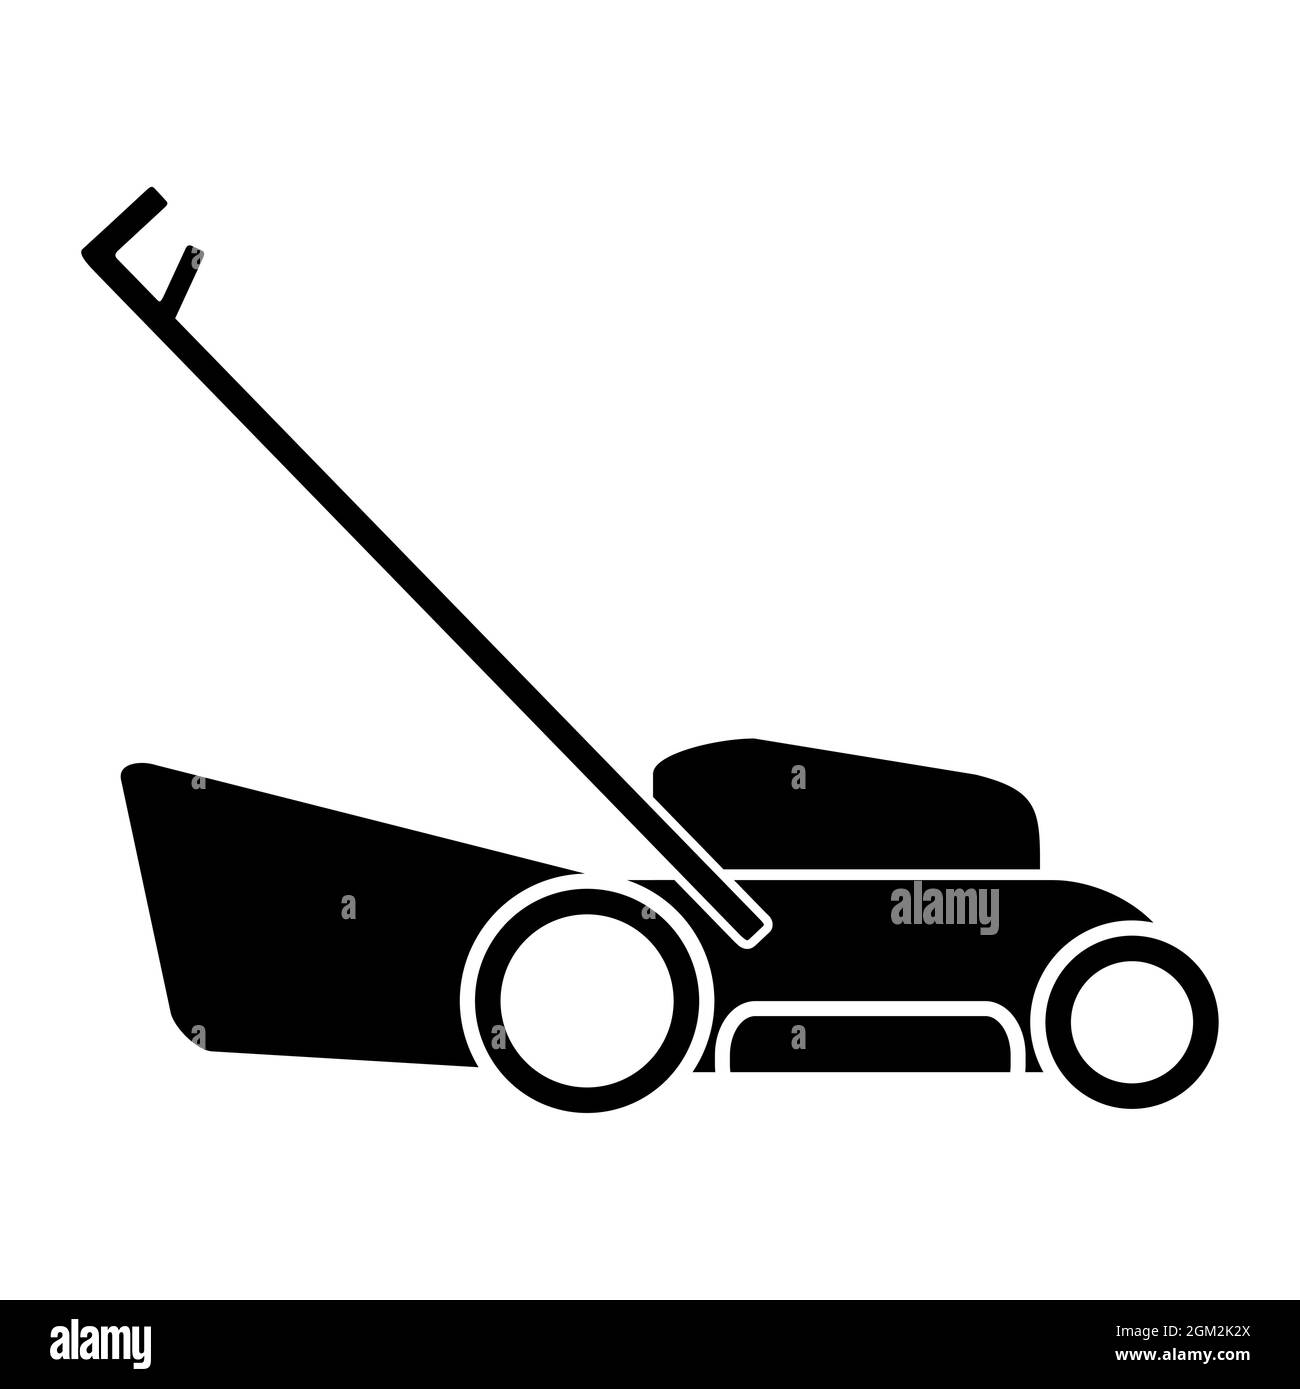 Simple editable black vector lawn mower, lawnmower, mower icon isolated on white background Stock Vector